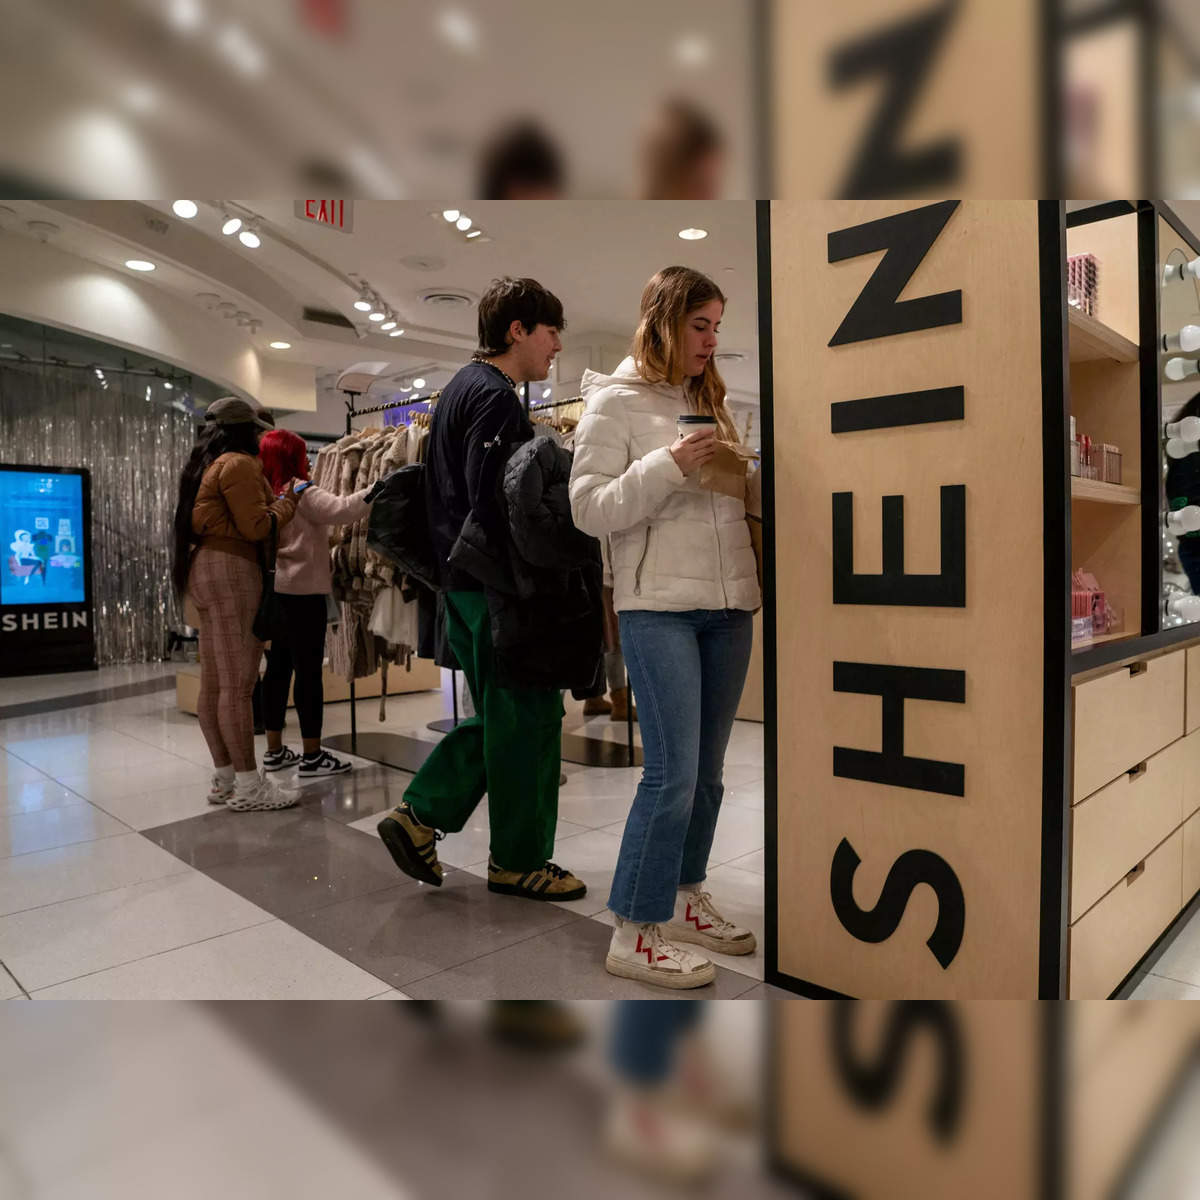 Shein files for U.S. IPO, looks to expand global reach